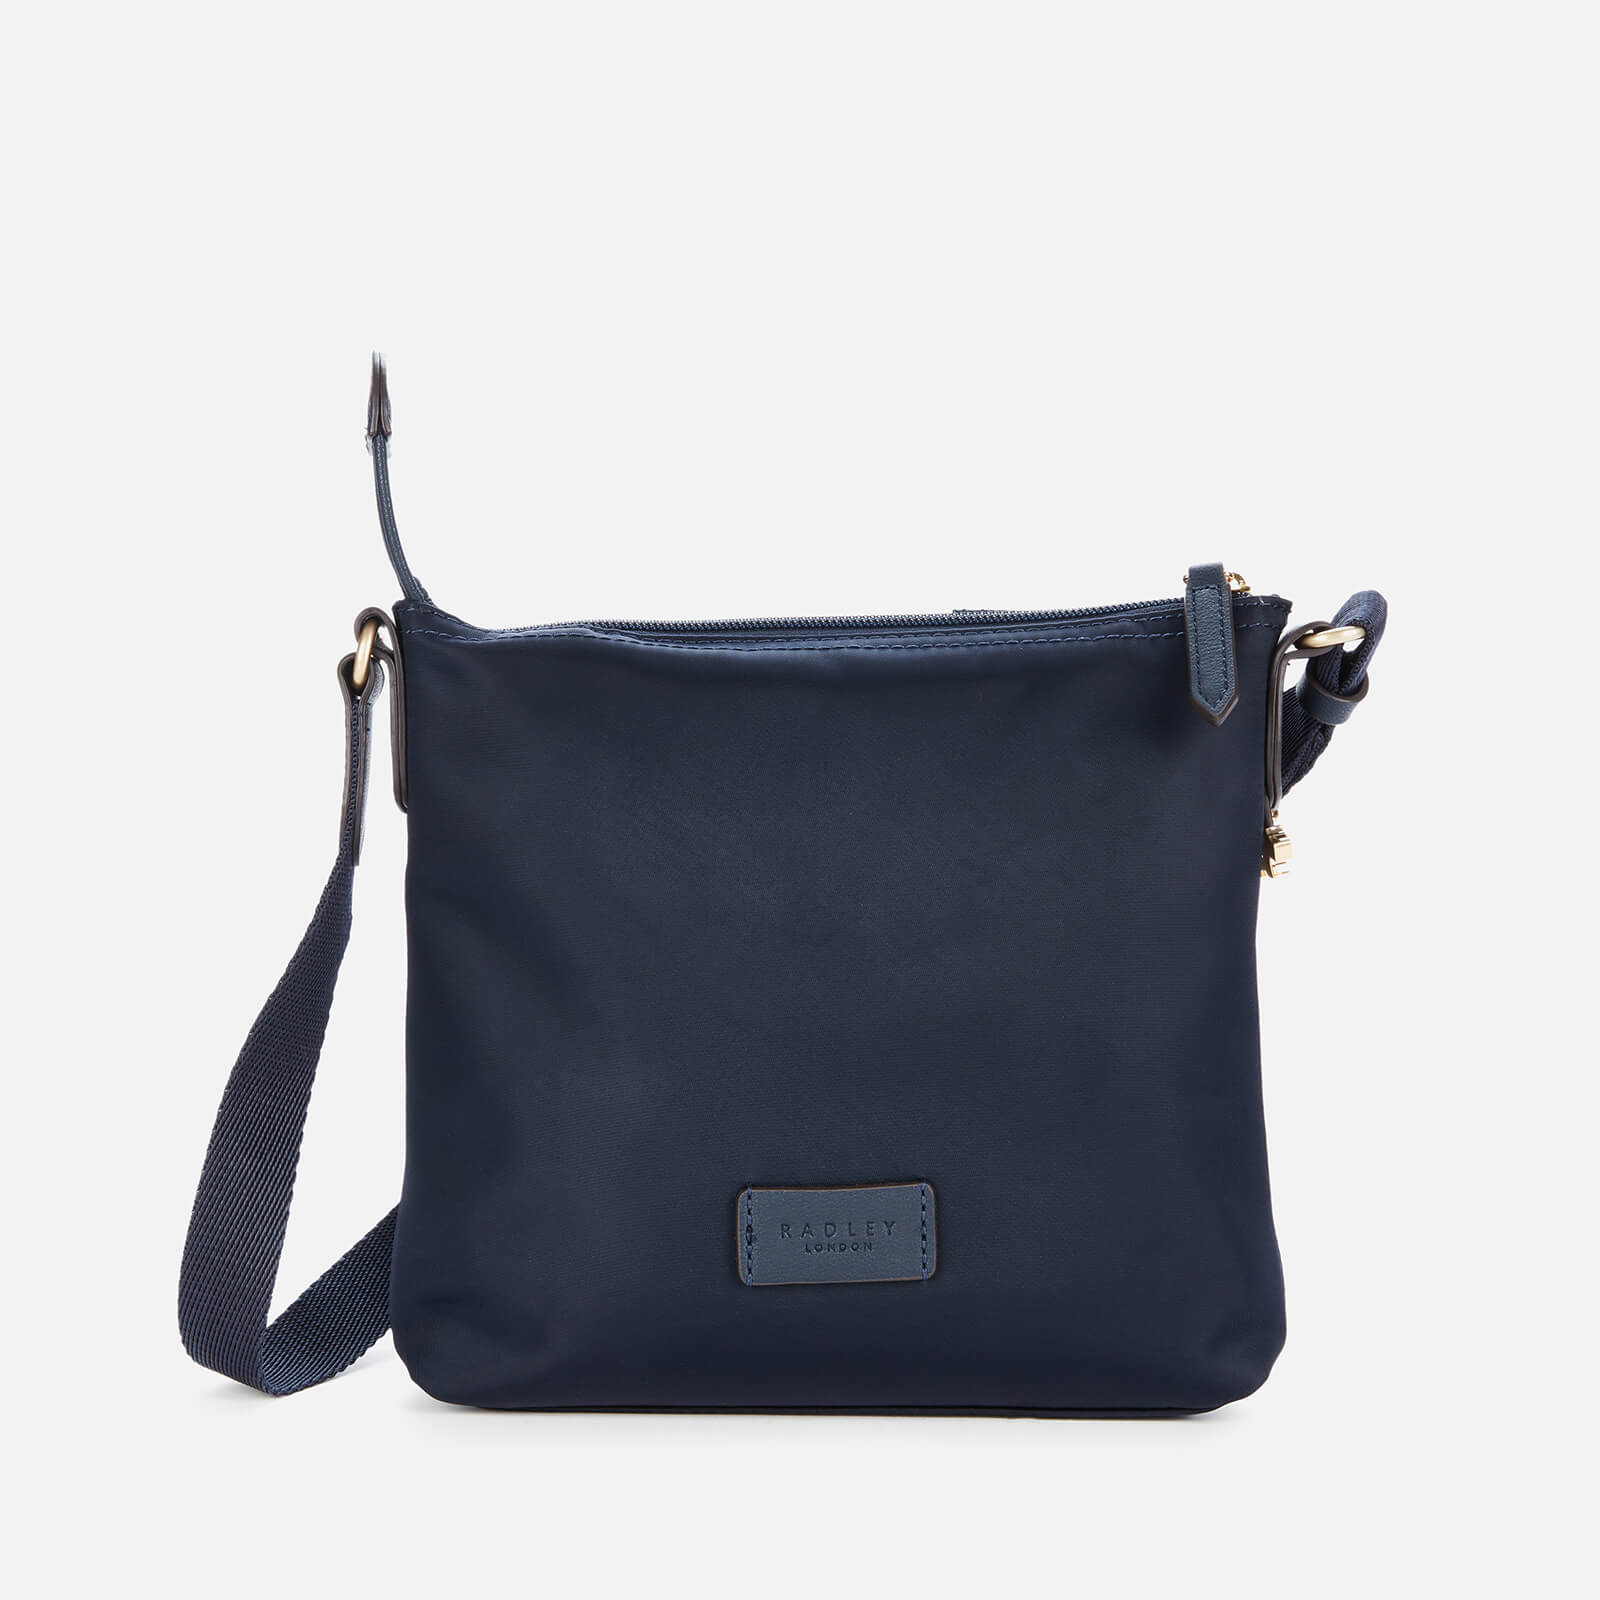 Radley Women's Pocket Essentials Recycled Cross Body Bag - Ink product